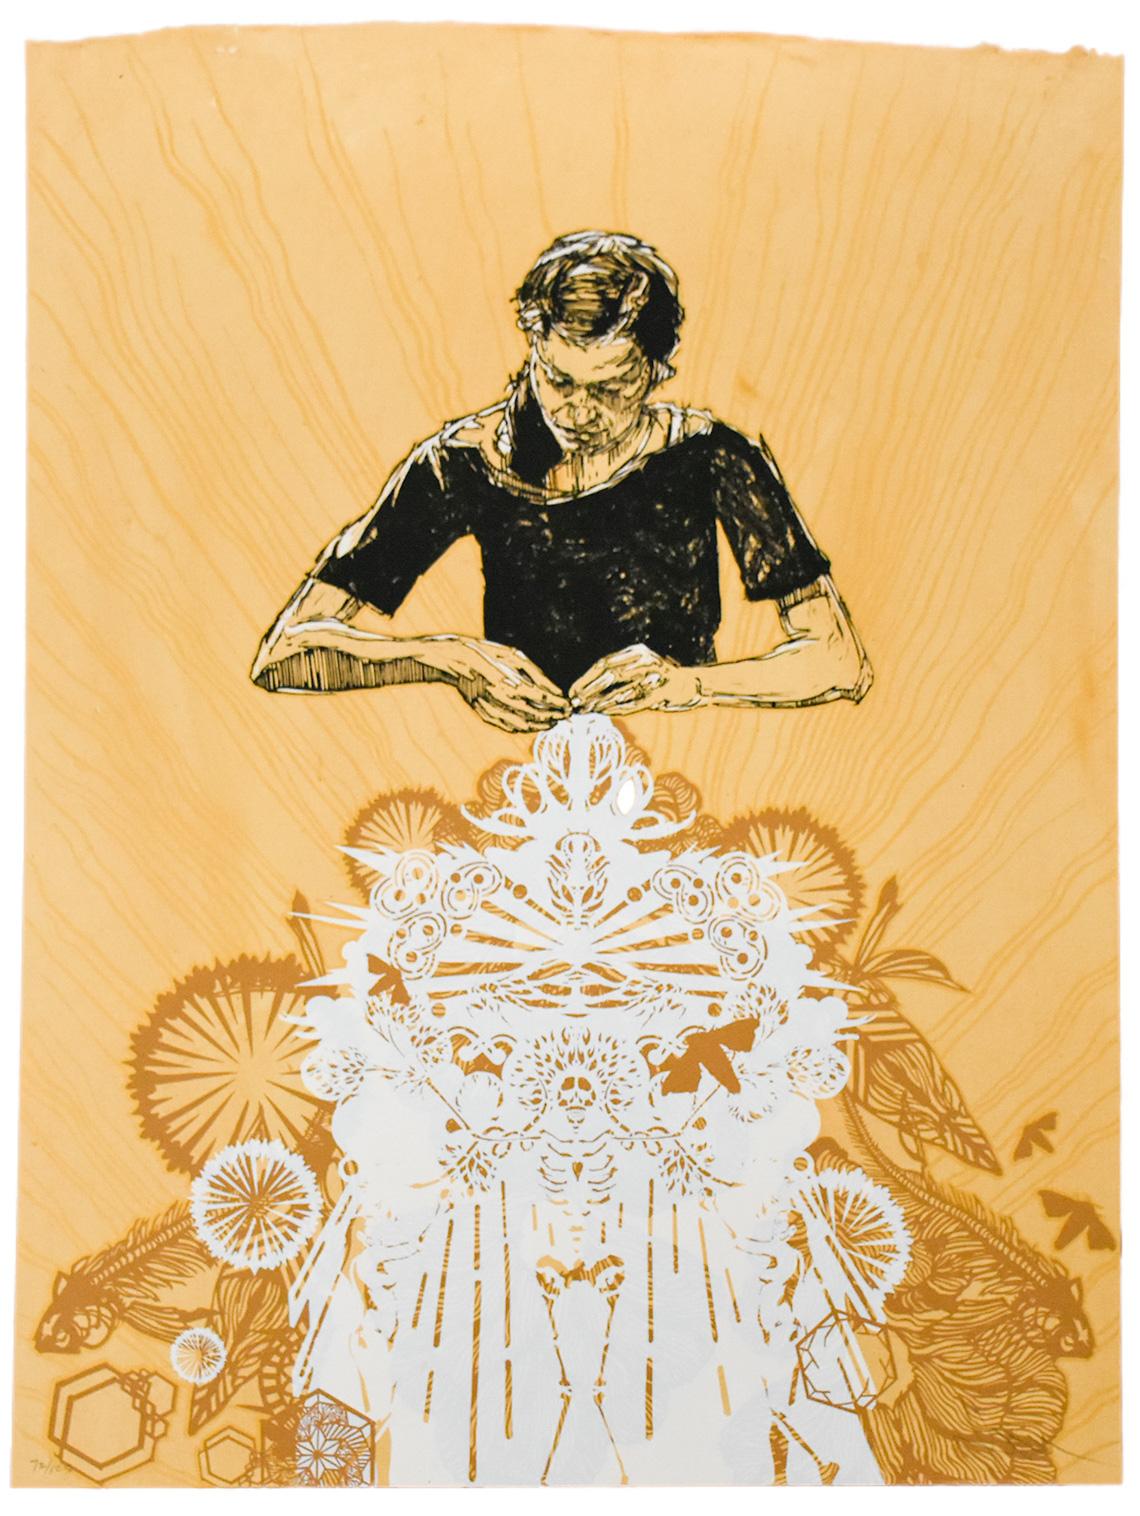 SWOON Alison The Lacemaker - Print by Swoon